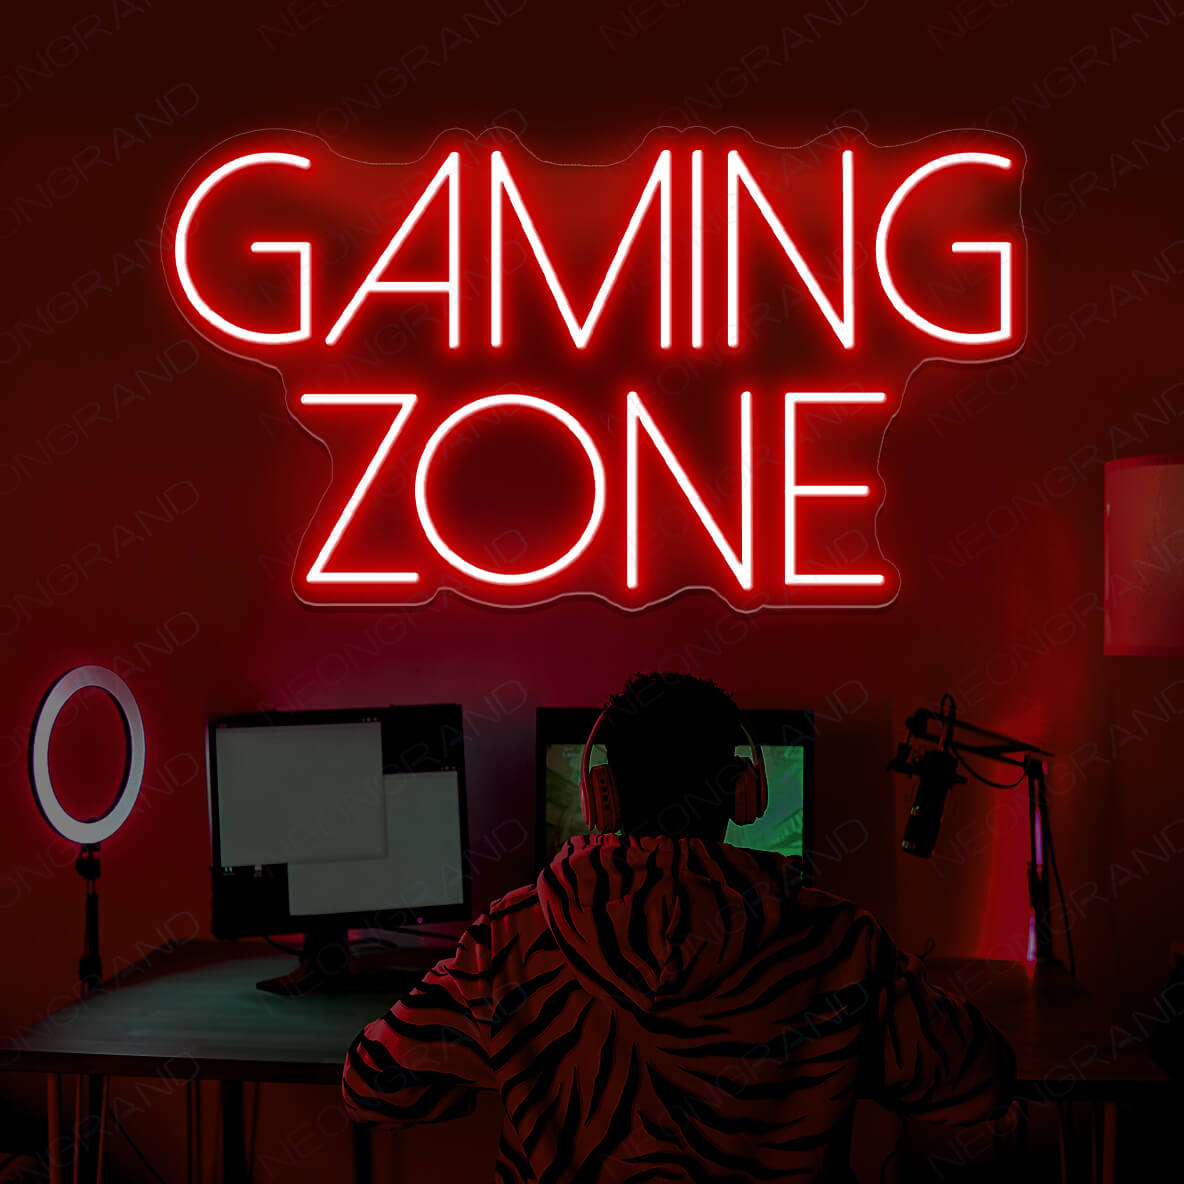 Gaming Zone Neon Sign Game Room Led Light red